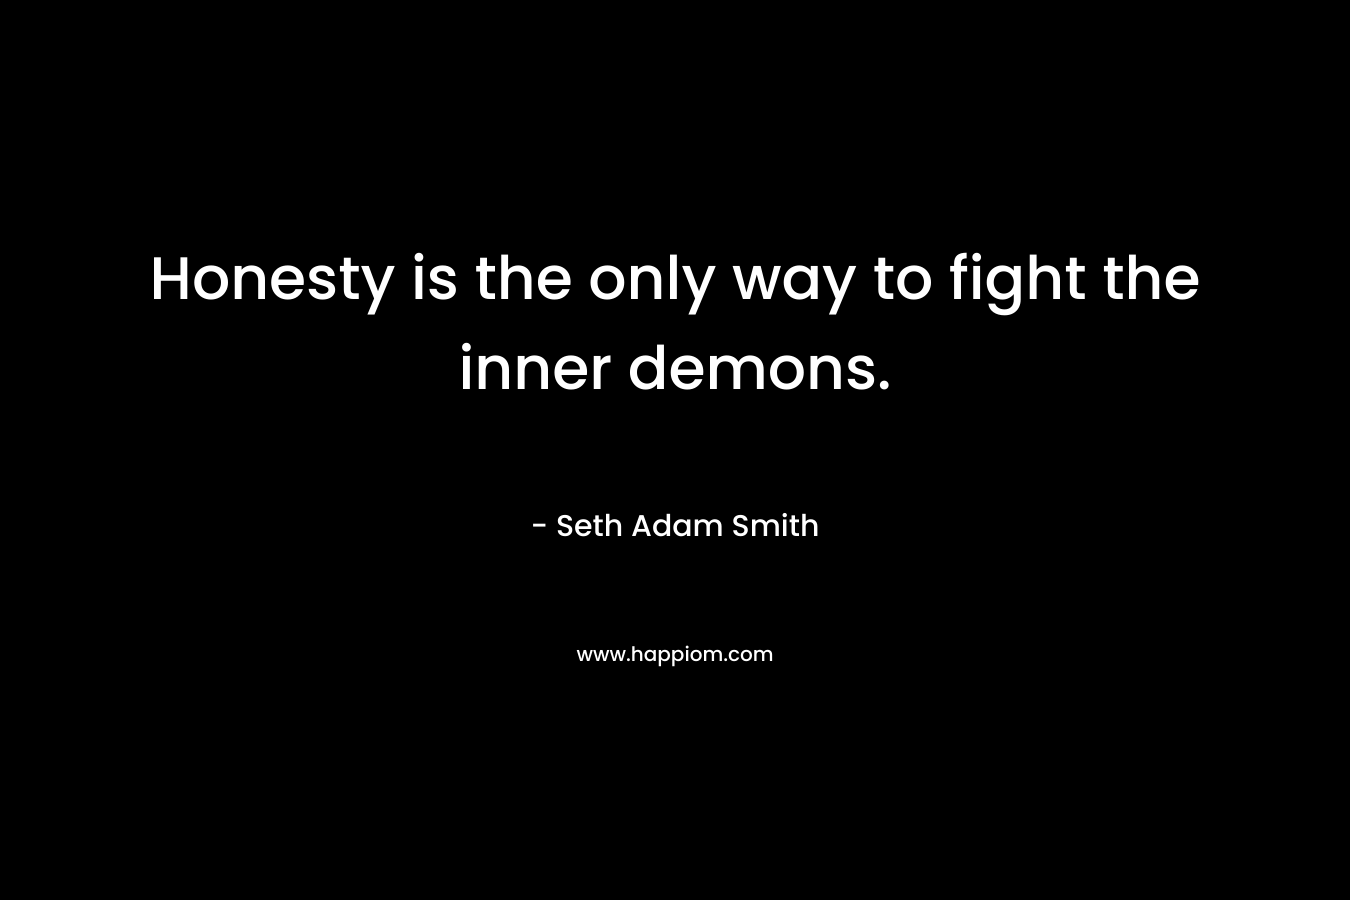 Honesty is the only way to fight the inner demons. – Seth Adam Smith